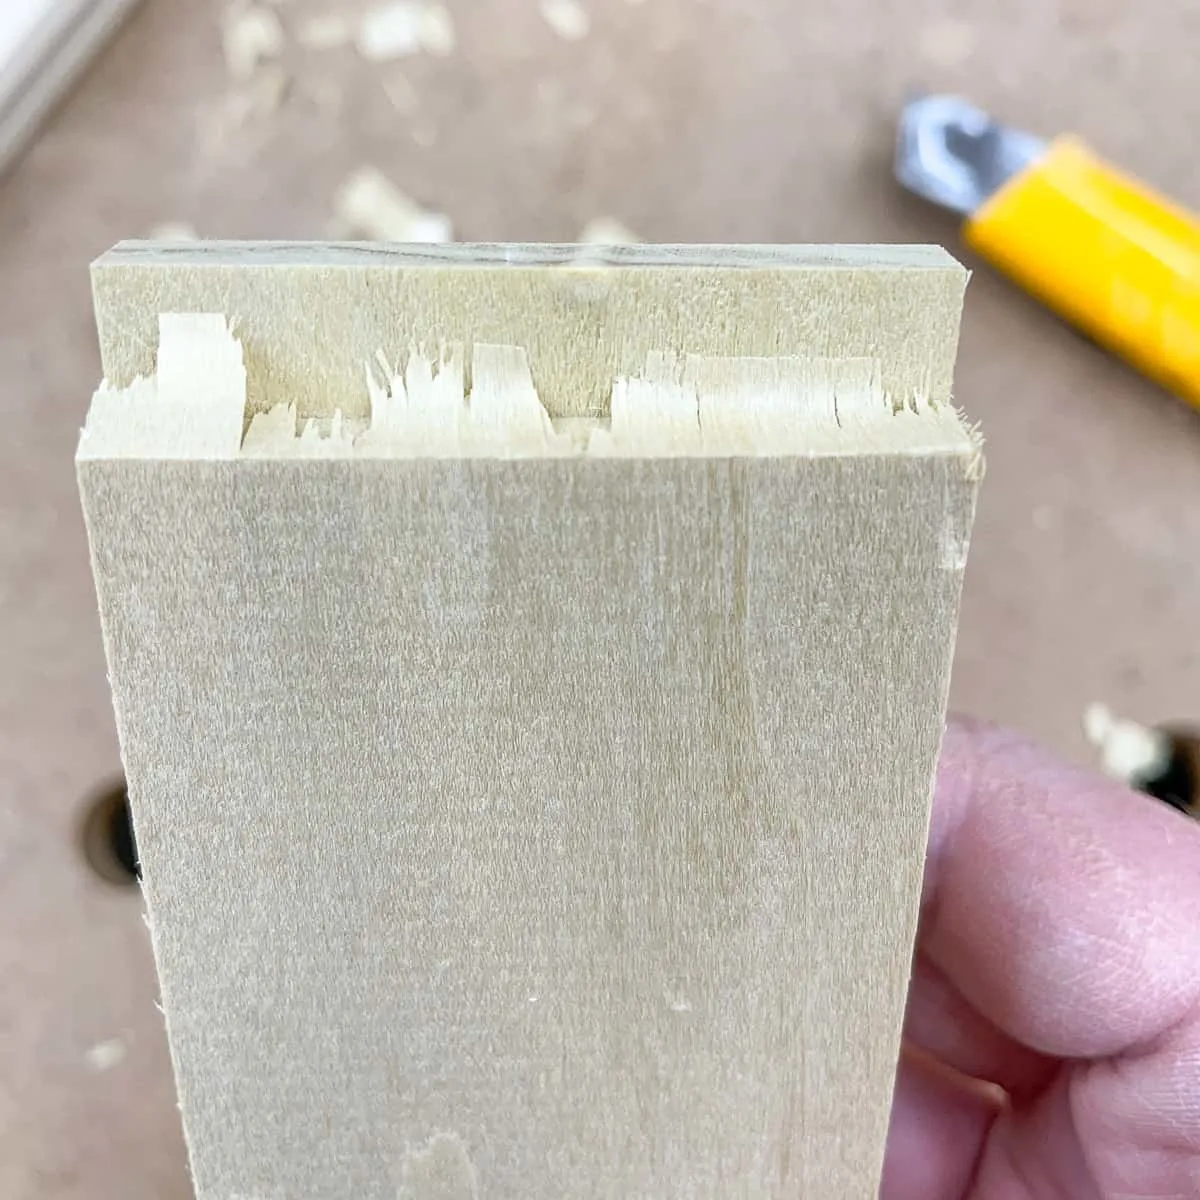 excess left by the rail router bit can easily be folded over and cut away